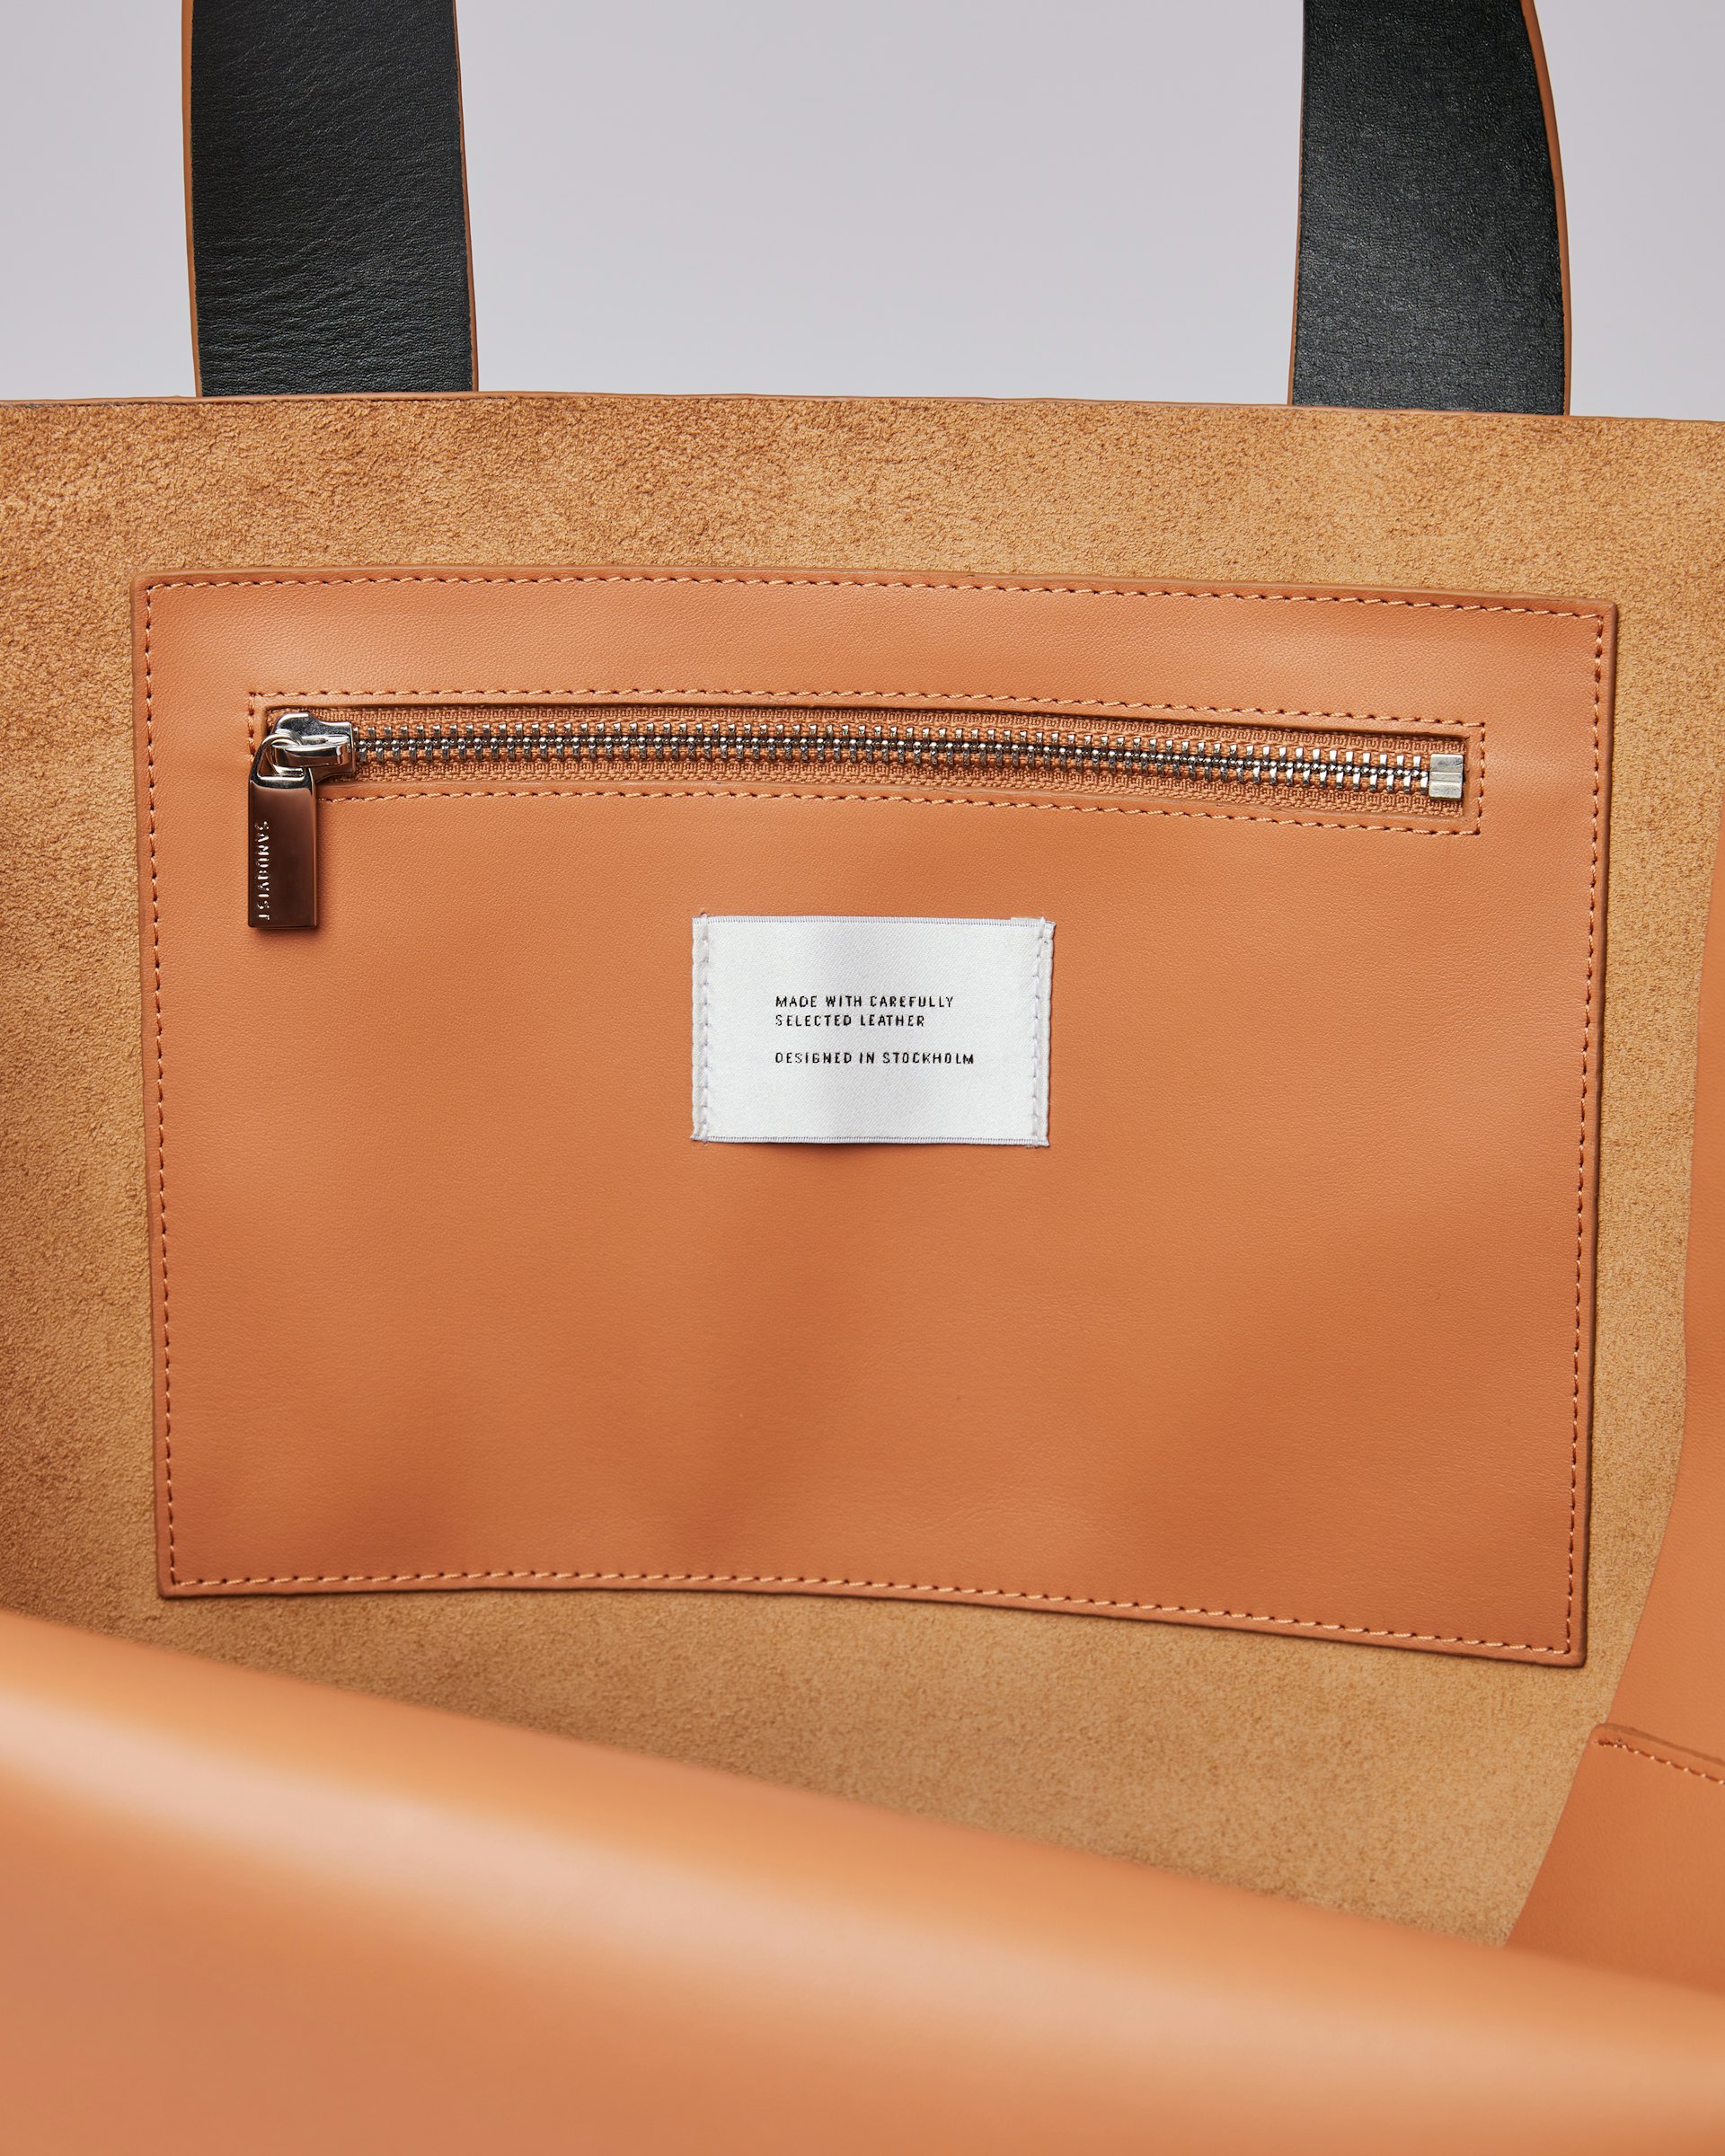 Iris belongs to the category Shoulder bags and is in color black & toffee (5 of 6)